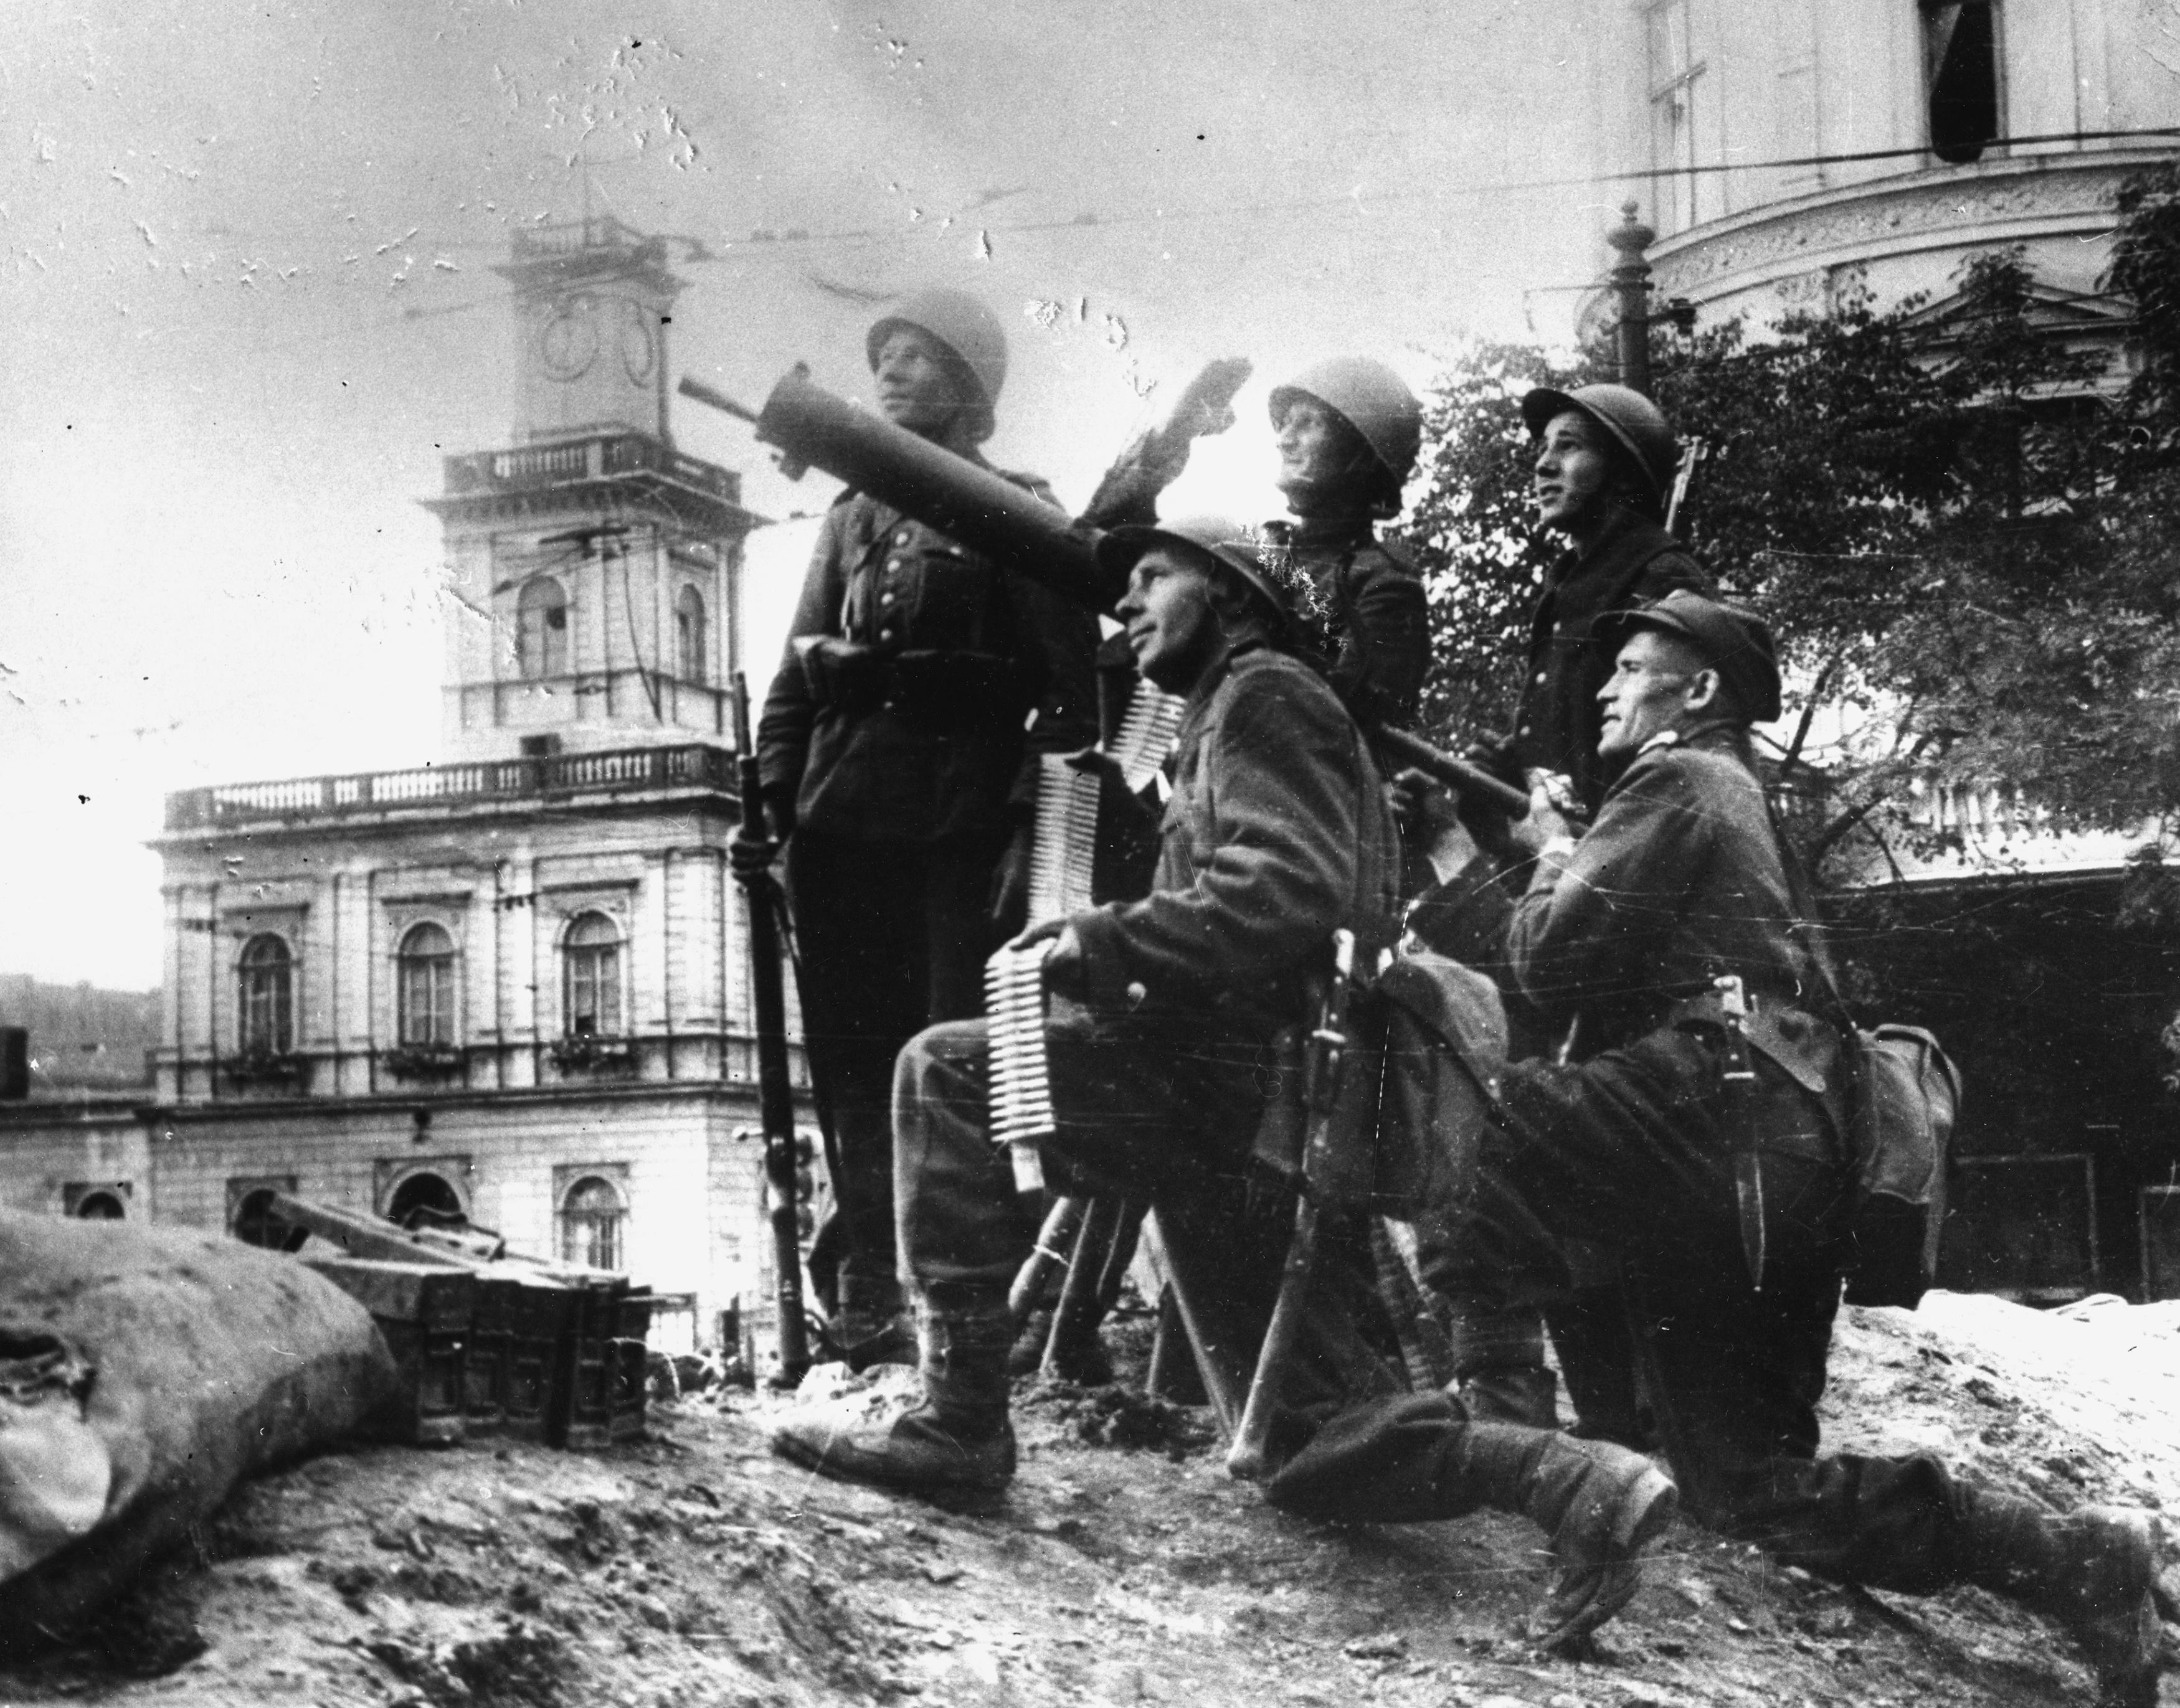 Polish soldiers from anti-aircraft artillery unit during the Siege of Warsaw by the Germans in September 1939.